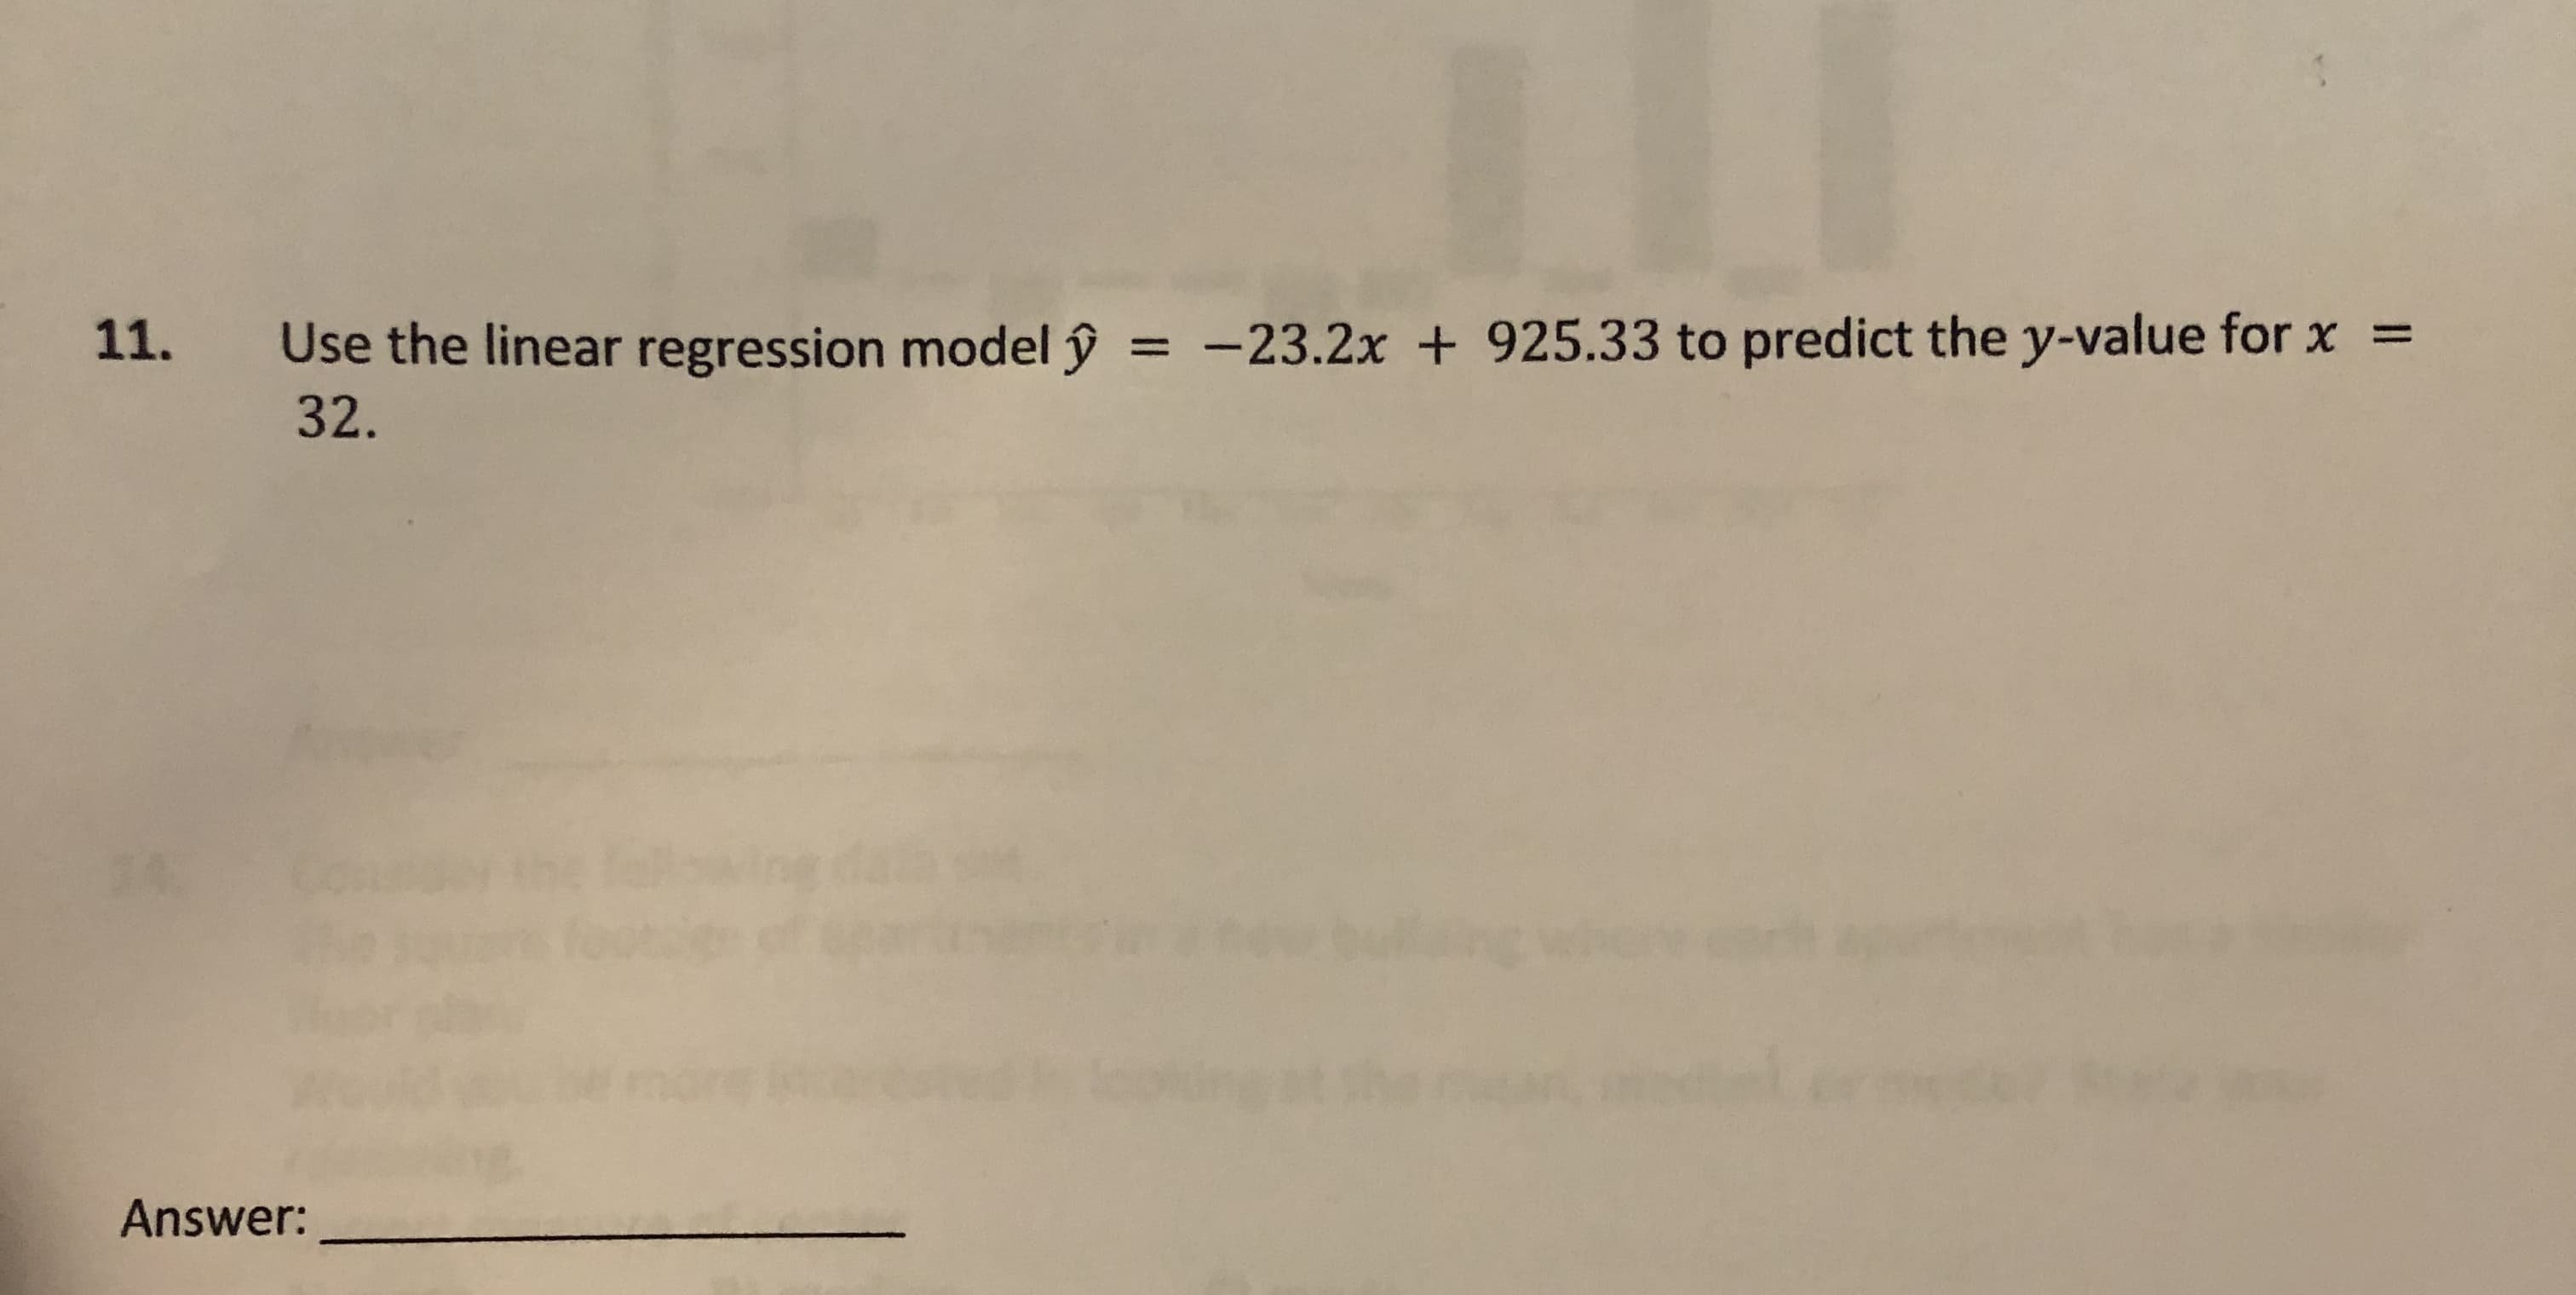 11.
Use the linear regression model ŷ = -23.2x + 925.33 to predict the y-value for x
%3D
32.
Answer:
